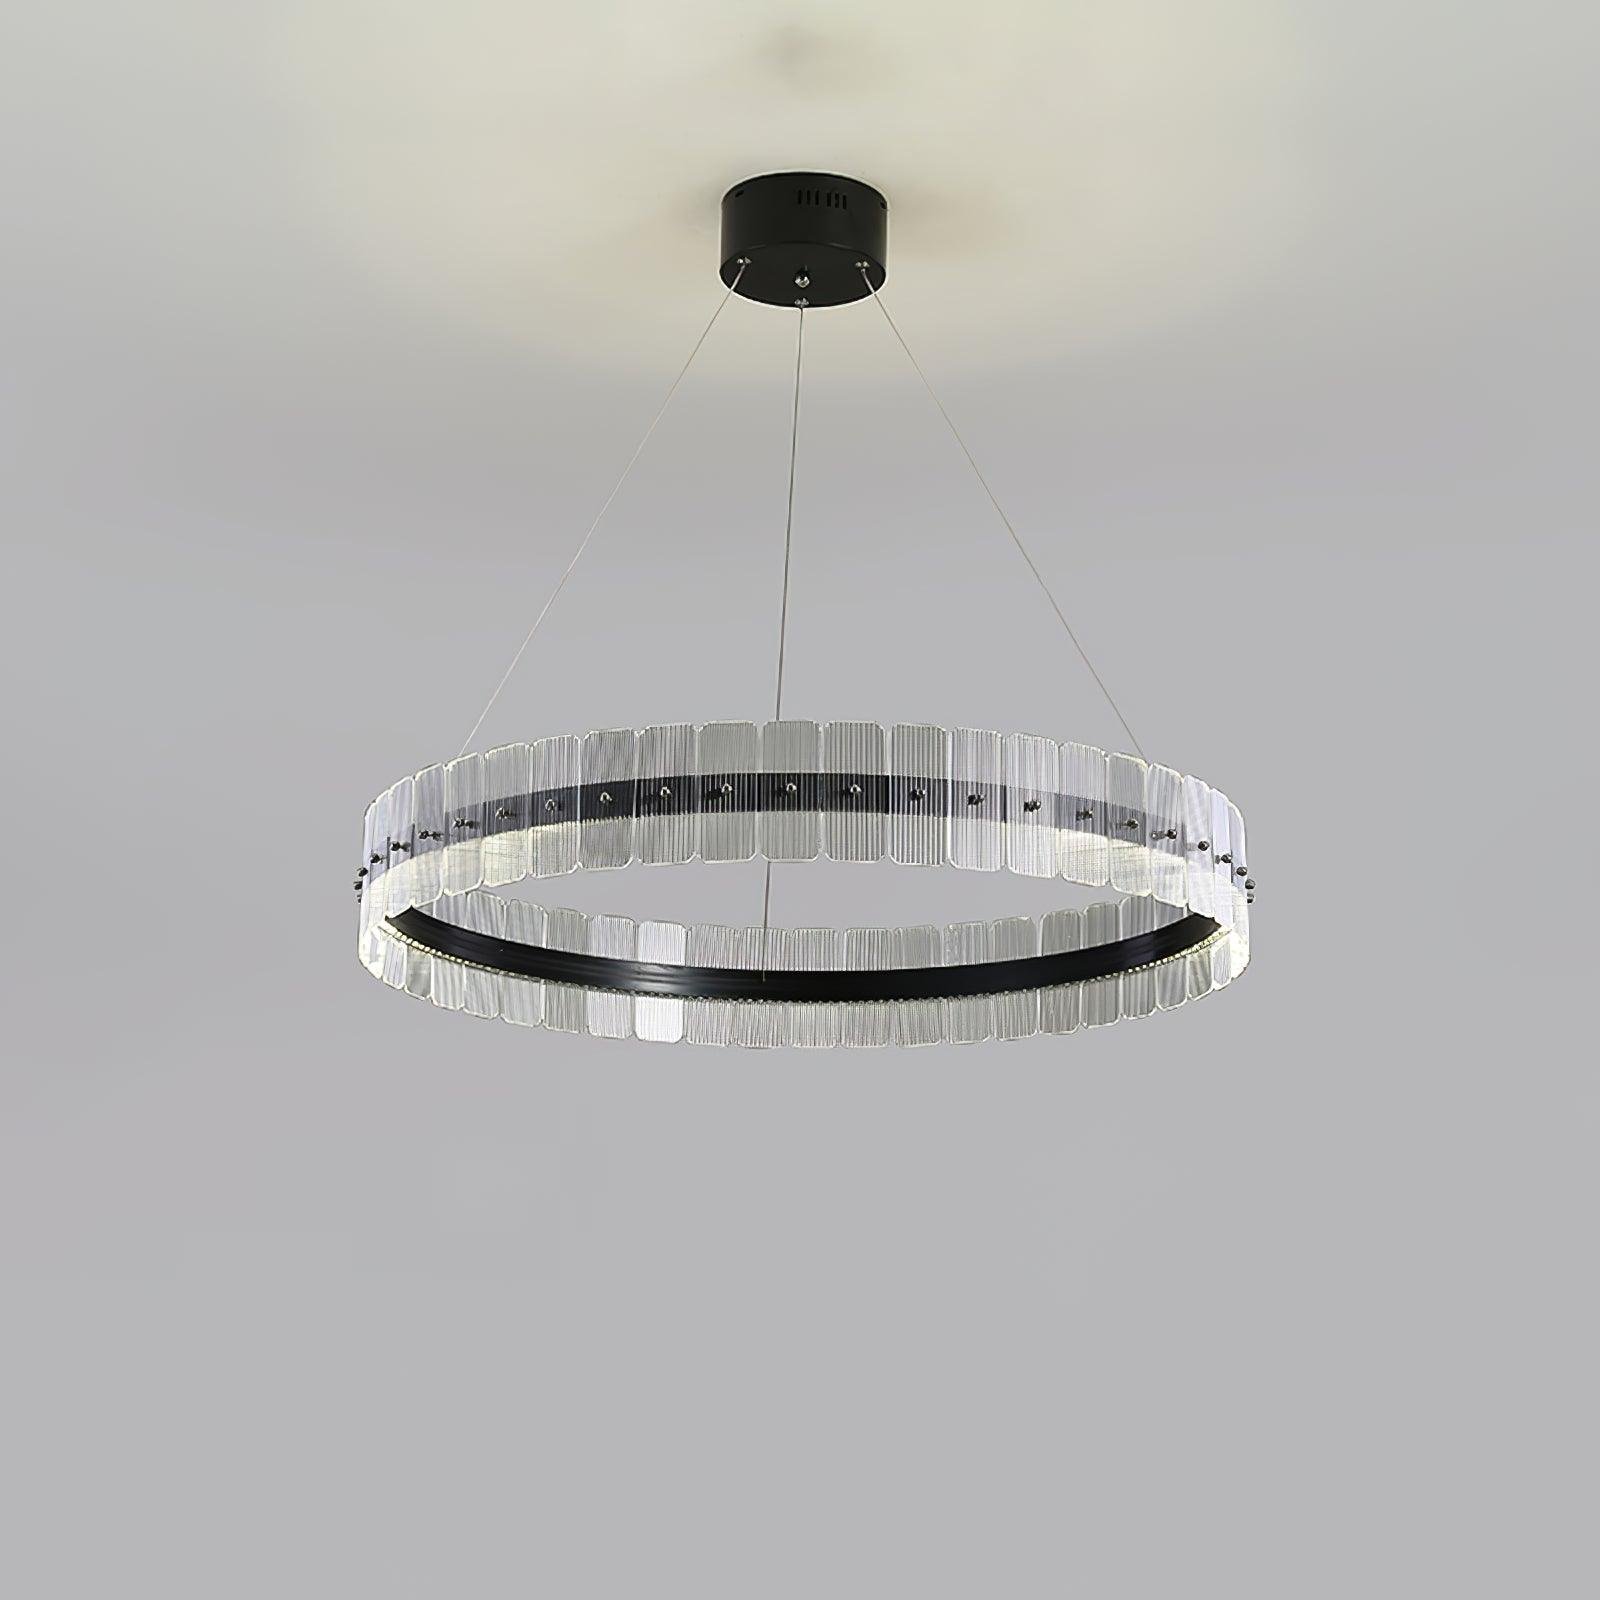 Chandelier Saturno featuring LED lights, with a diameter of 31.4 inches and a height of 4.7 inches (80cm x 12cm), in a sleek black and opaque design, emitting a cool white glow.